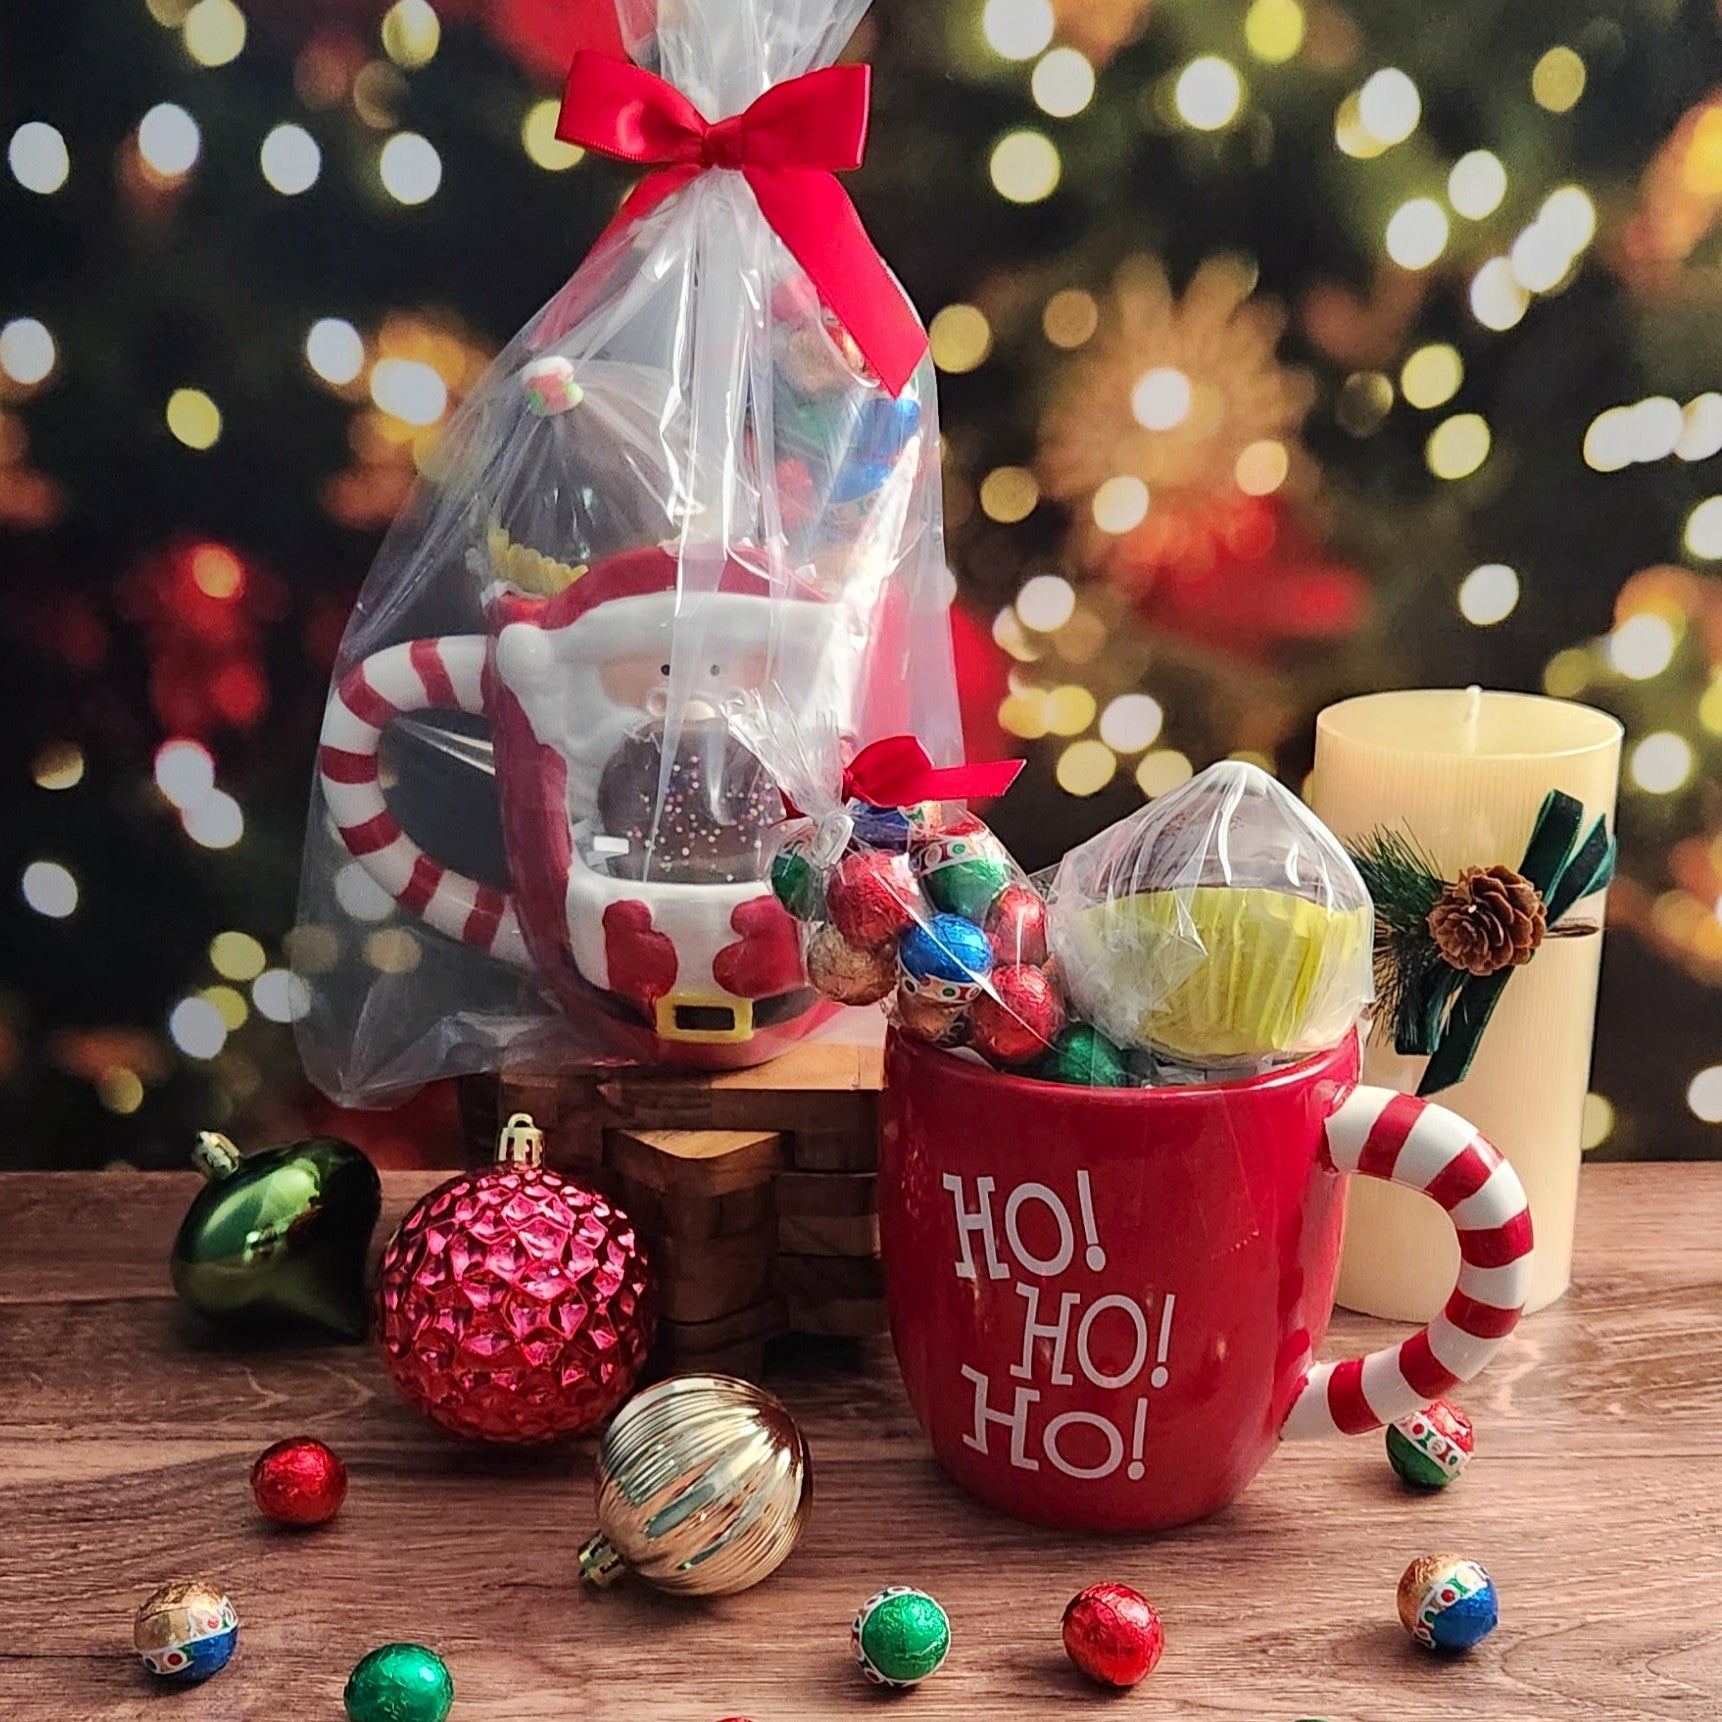 Enjoy the season with this charming ceramic mug featuring Santa with a built-in a cookie holder. Comes with a milk chocolate shortbread cookie, hot cocoa bomb, and foiled ornaments. 